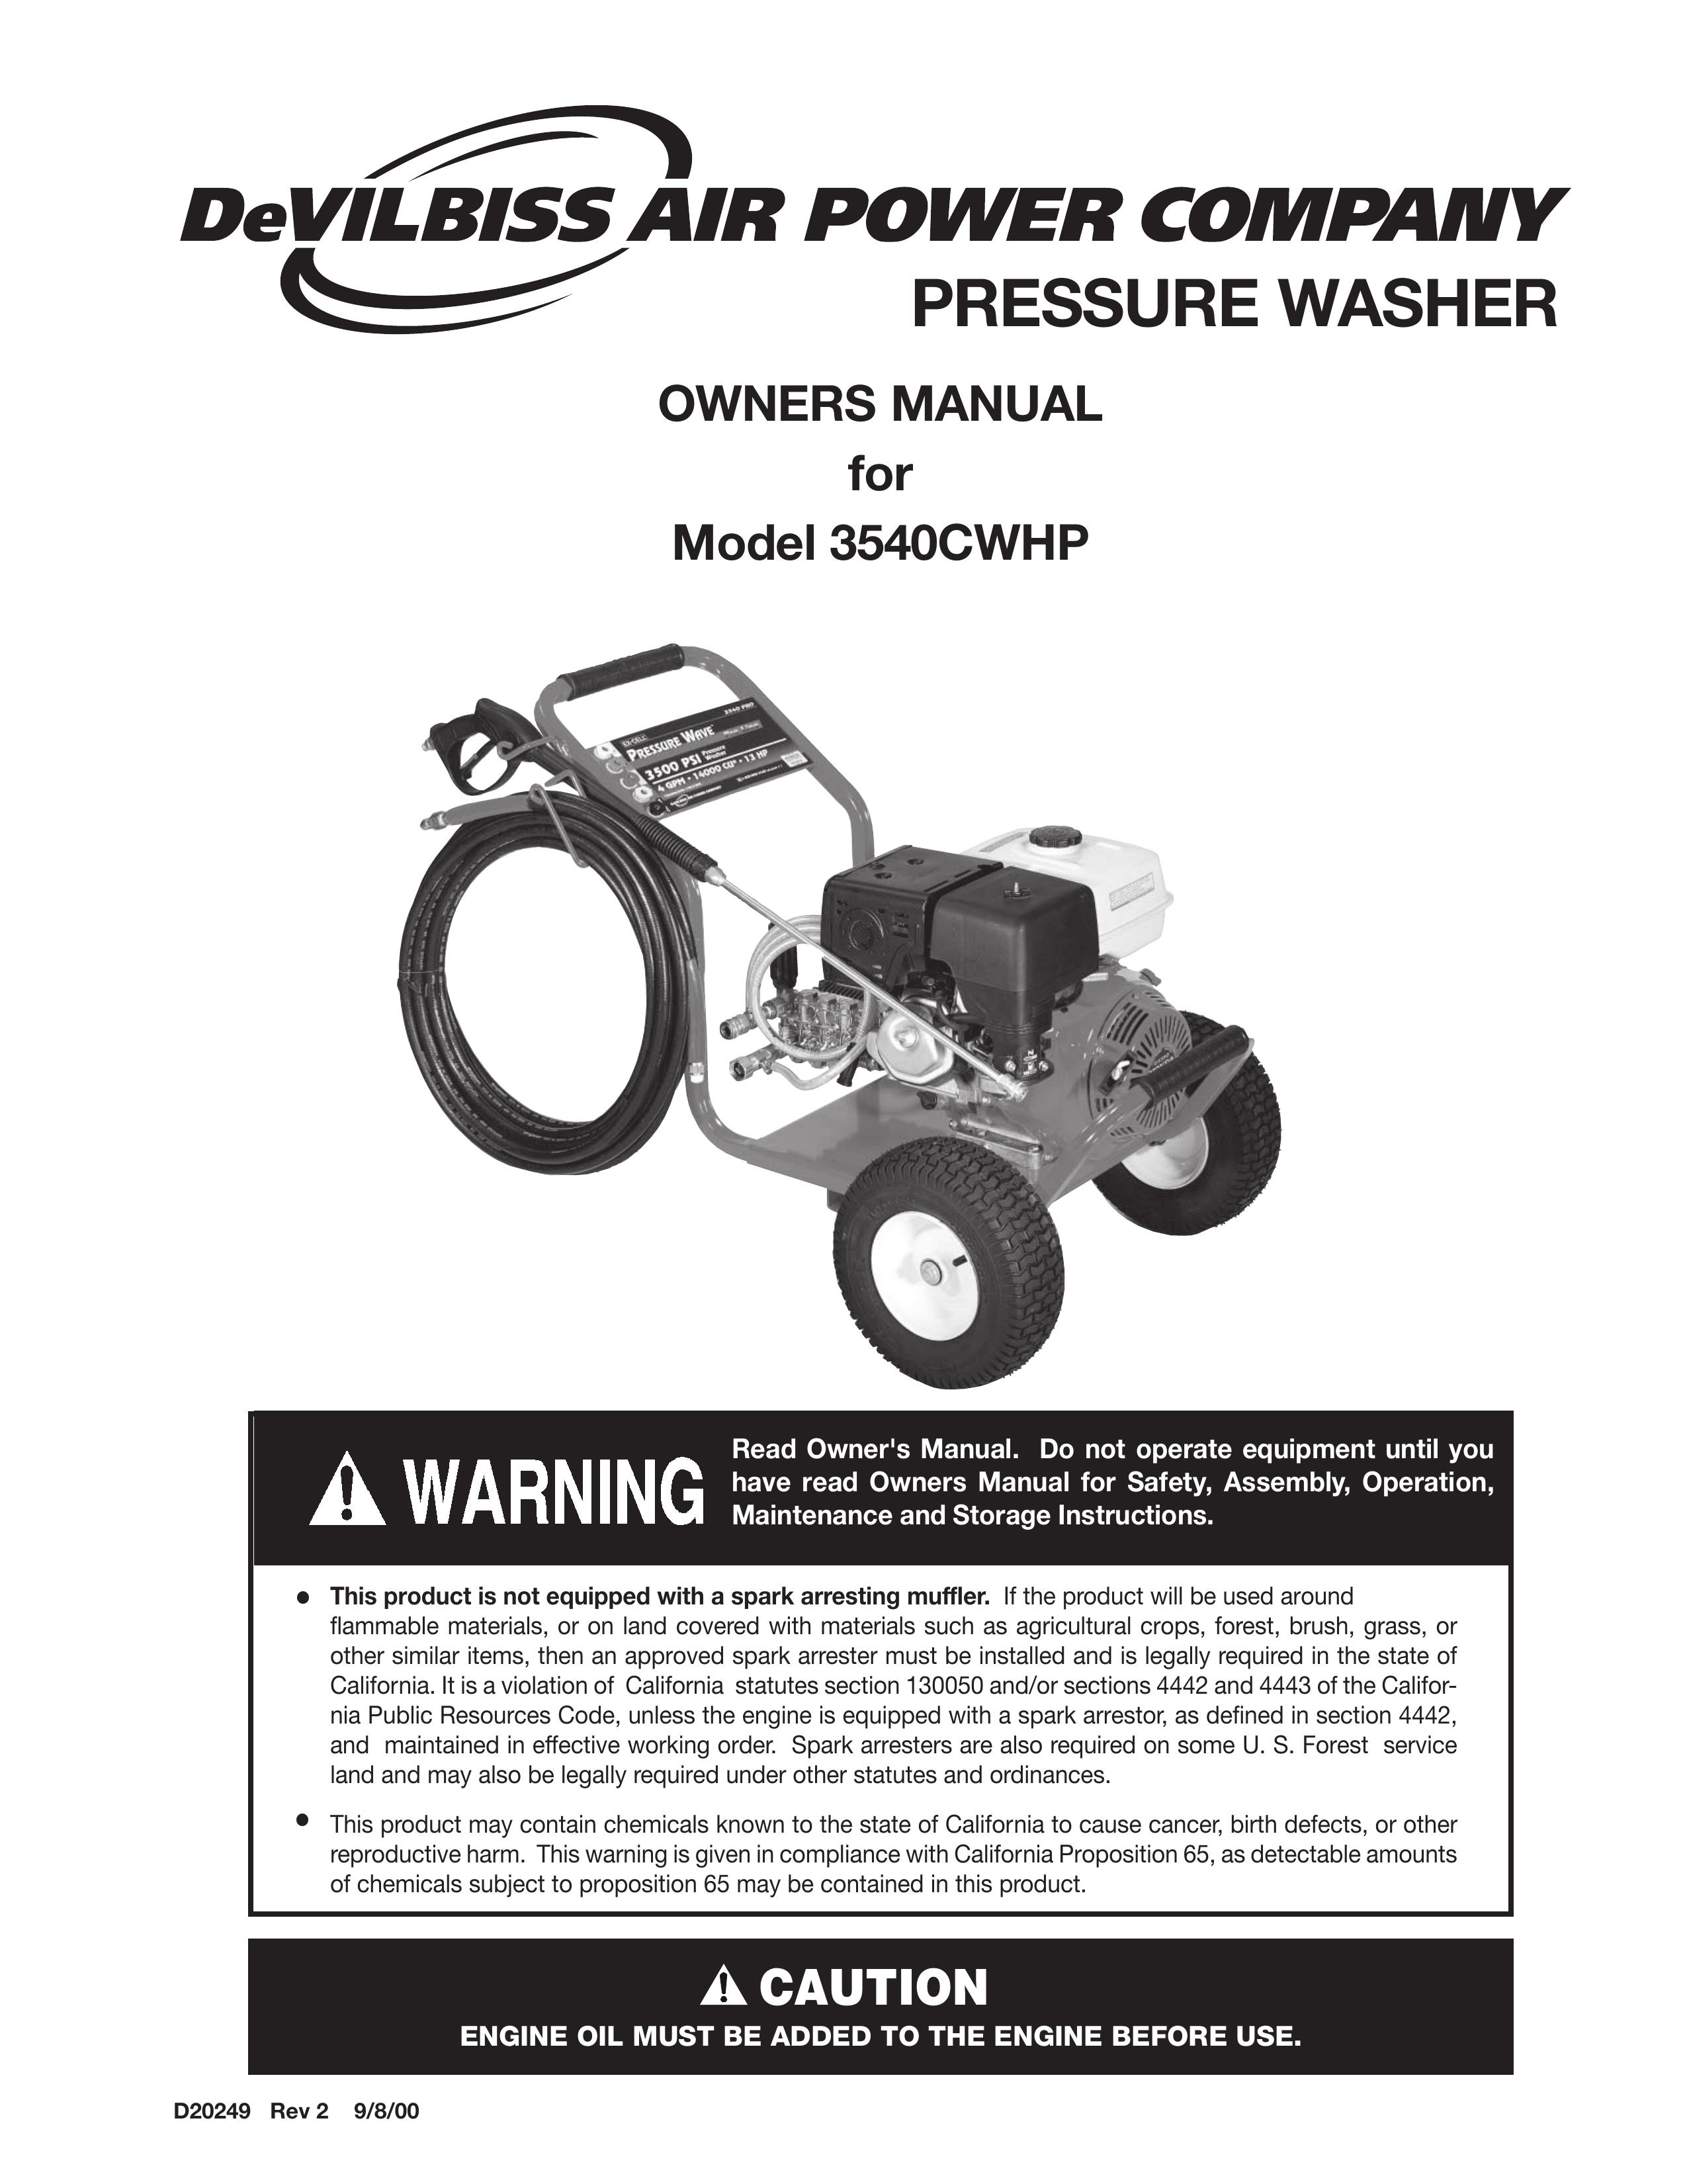 DeVillbiss Air Power Company D20249 Pressure Washer User Manual